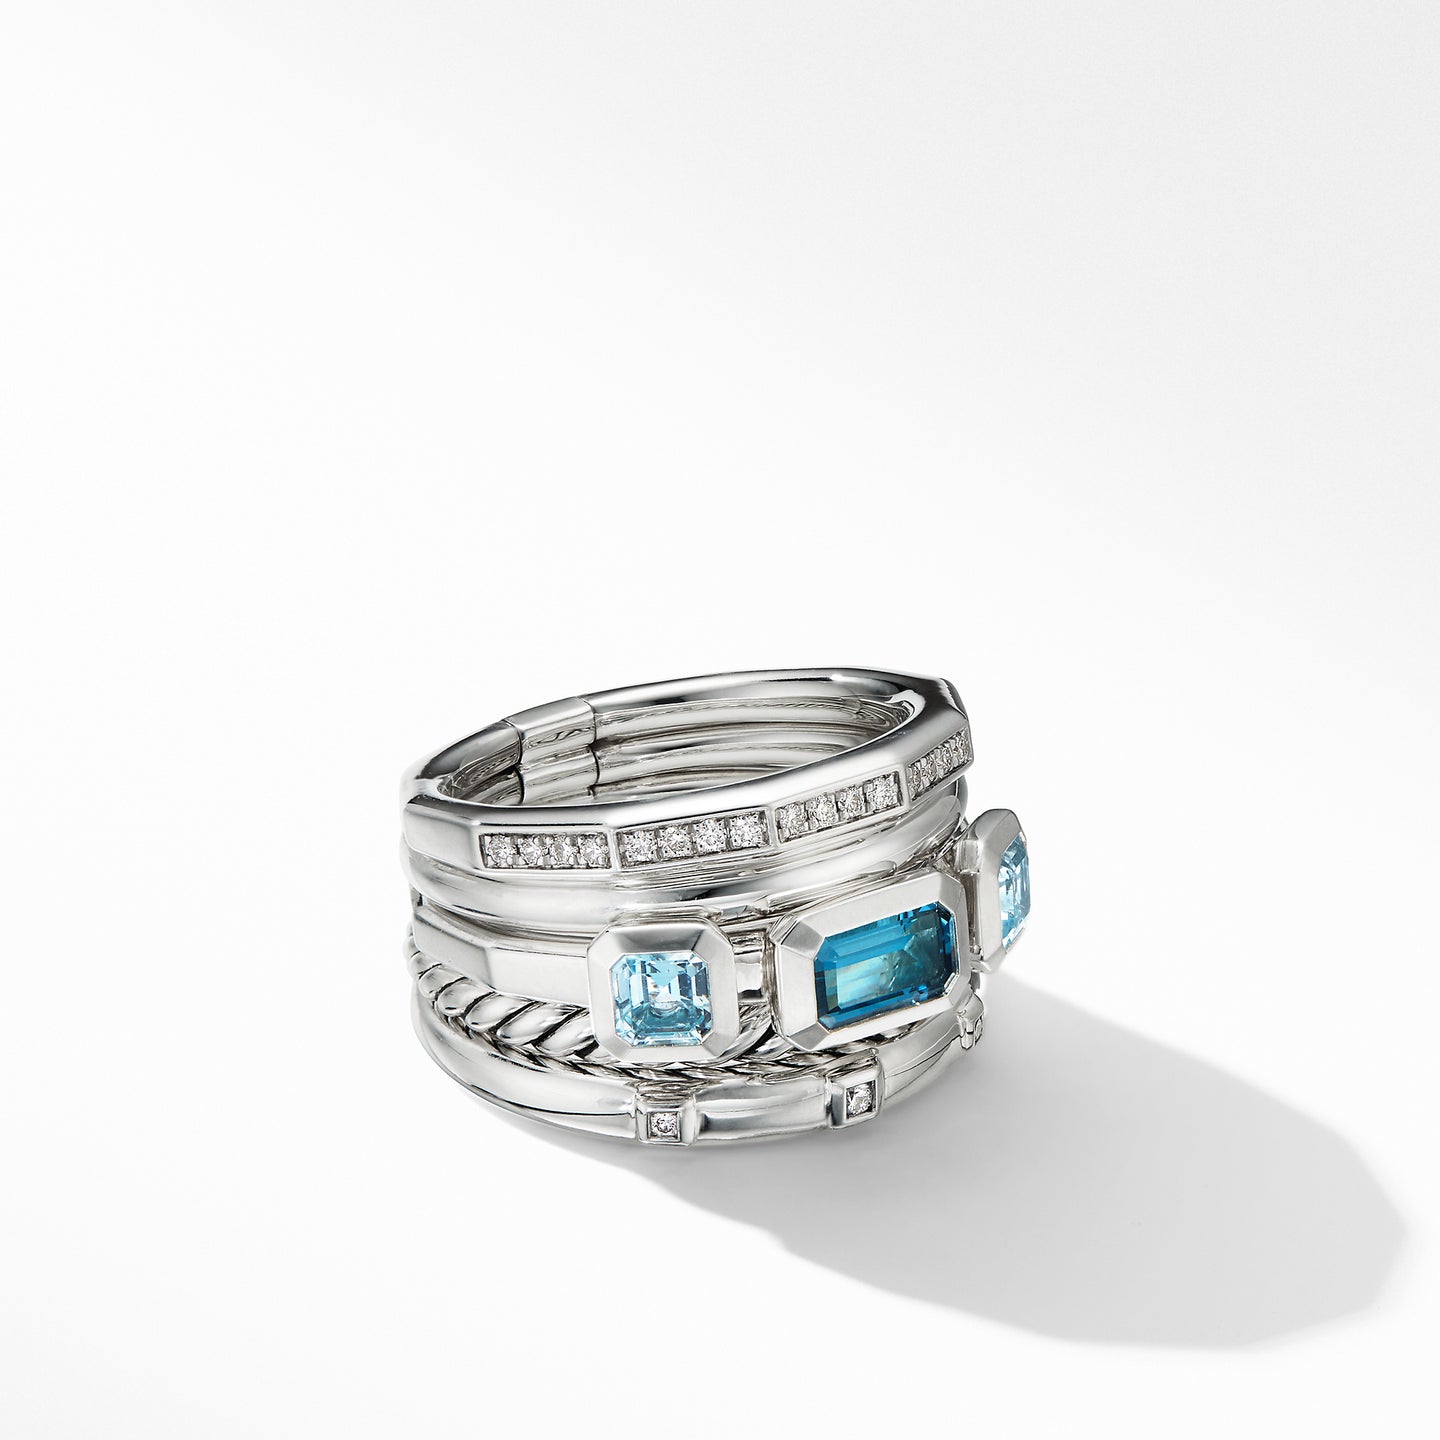 Stax Wide Ring with Hampton Blue Topaz and Diamonds, Size 8